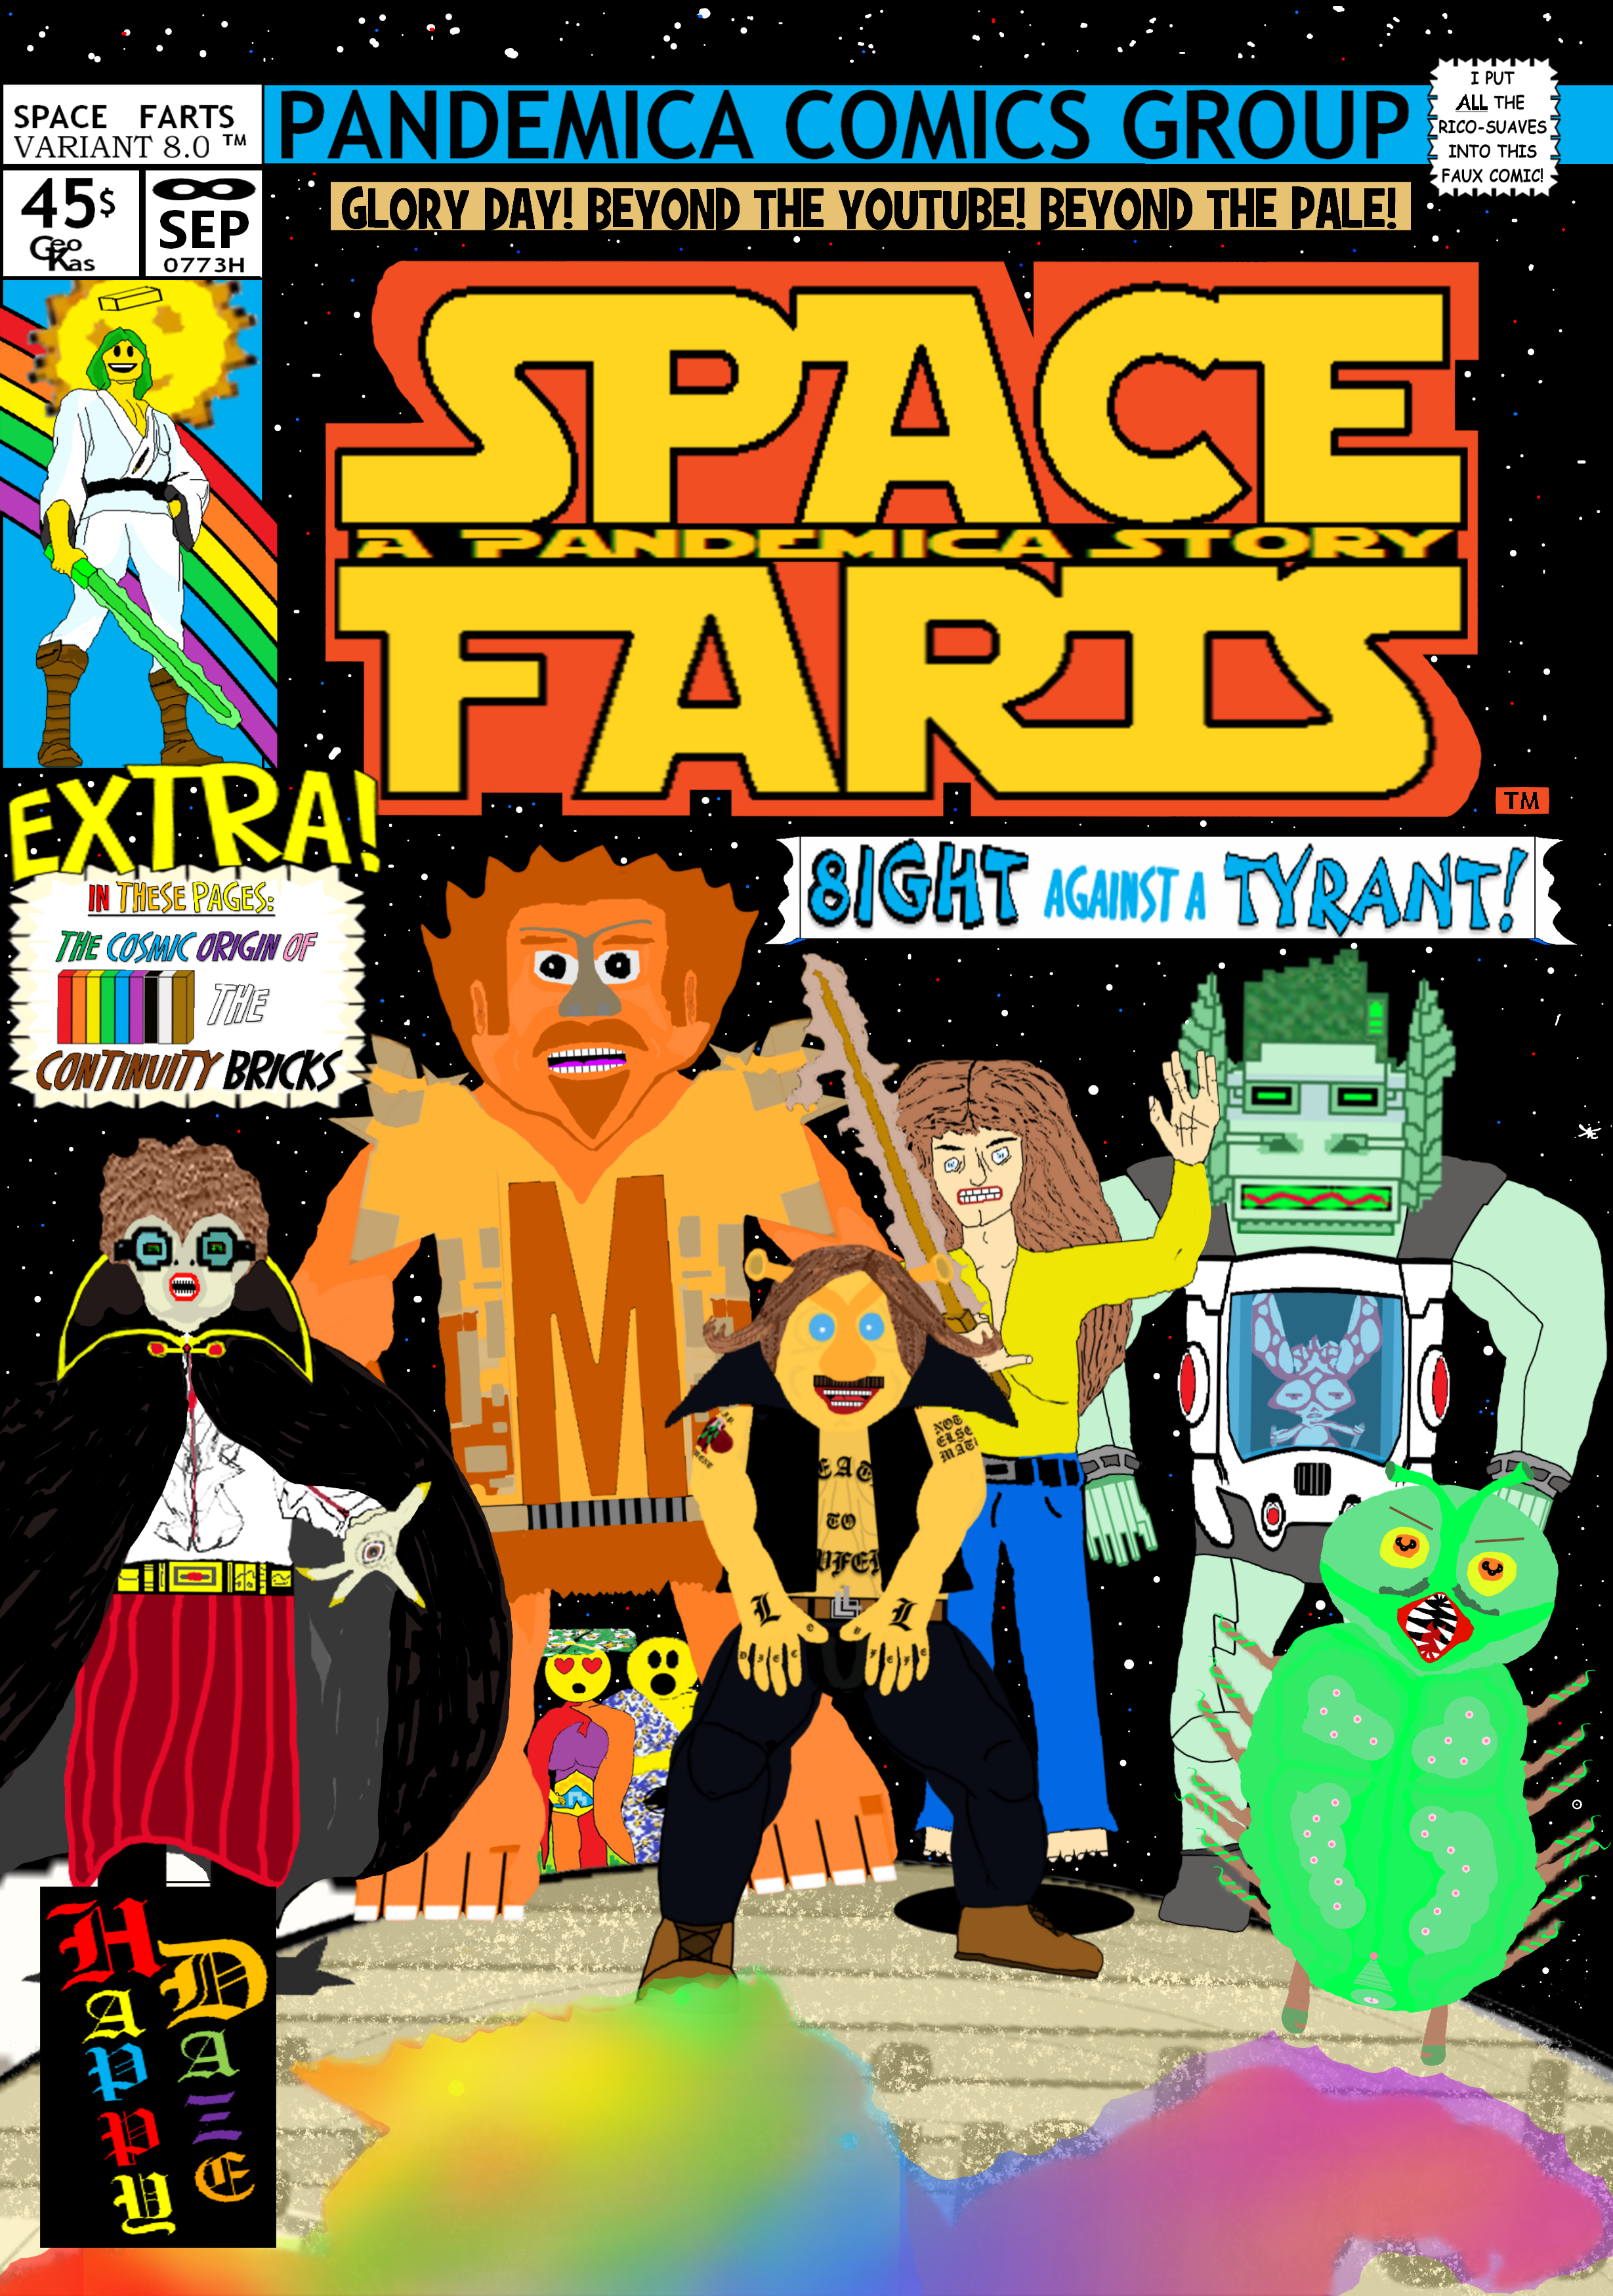 Space Farts #8.0